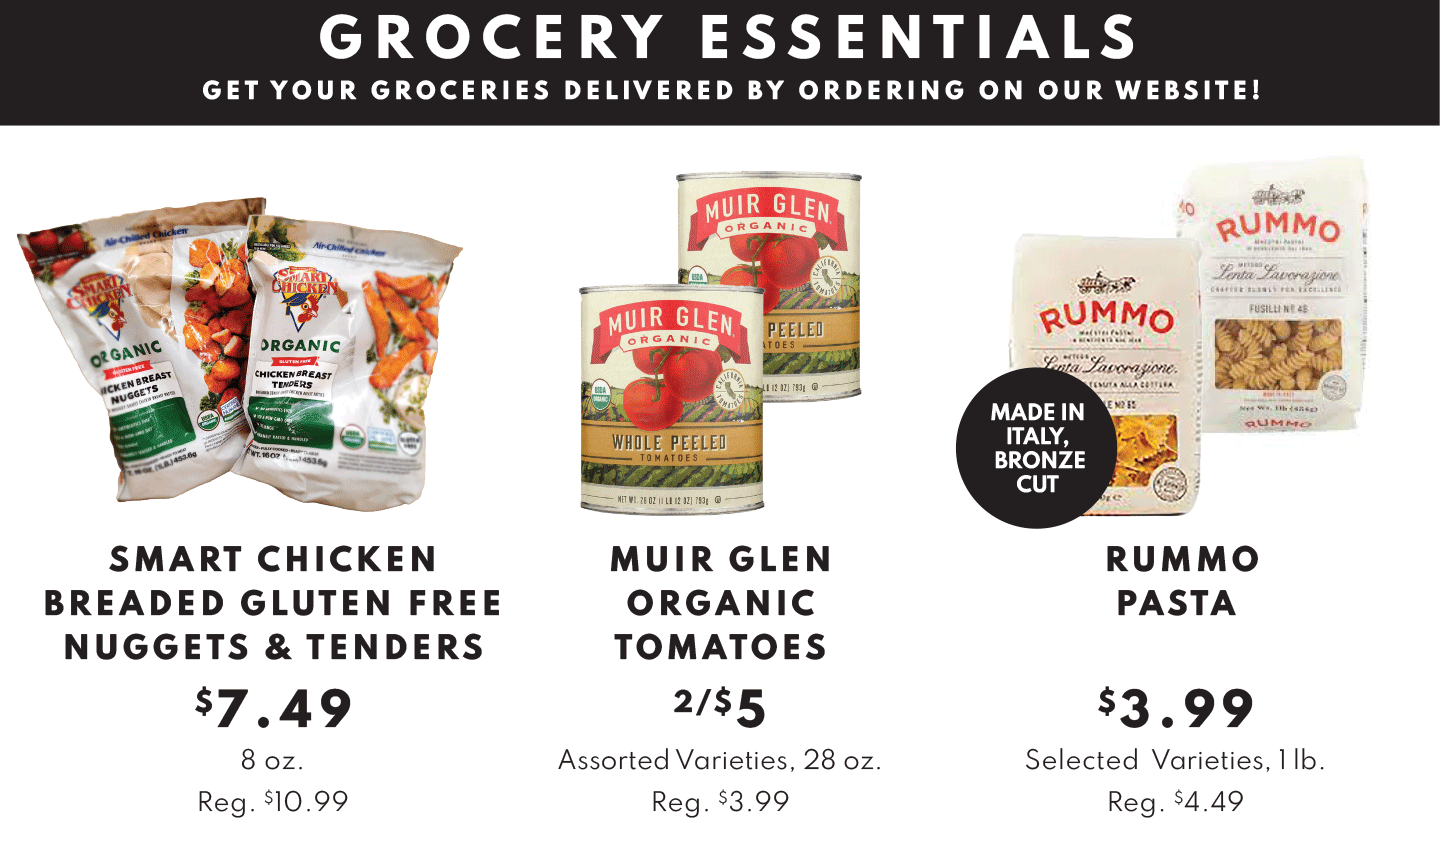 Smart Chicken Breaded Gluten Free Nuggets and Tenders $7.49, Muir Glen Organic Tomatoes 2/$5 and Rummo Pasta $3.99